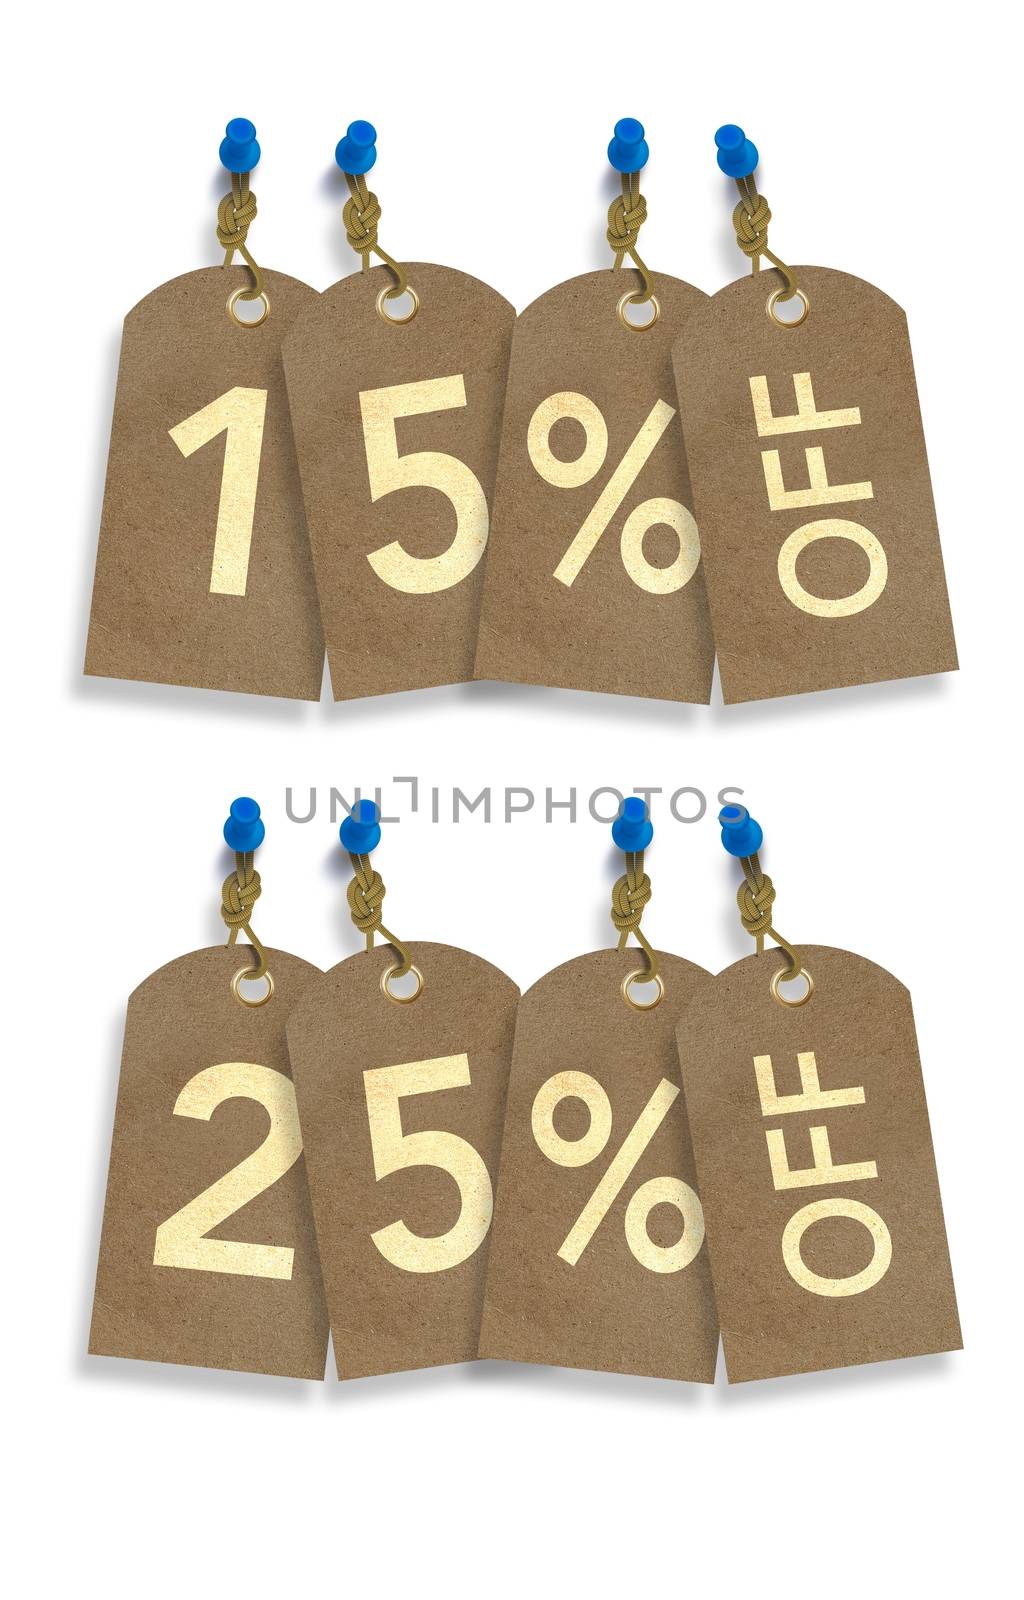 Special Sale Paper Tags Isolated on White. 15% and 25% Off Discount Tags Illustration